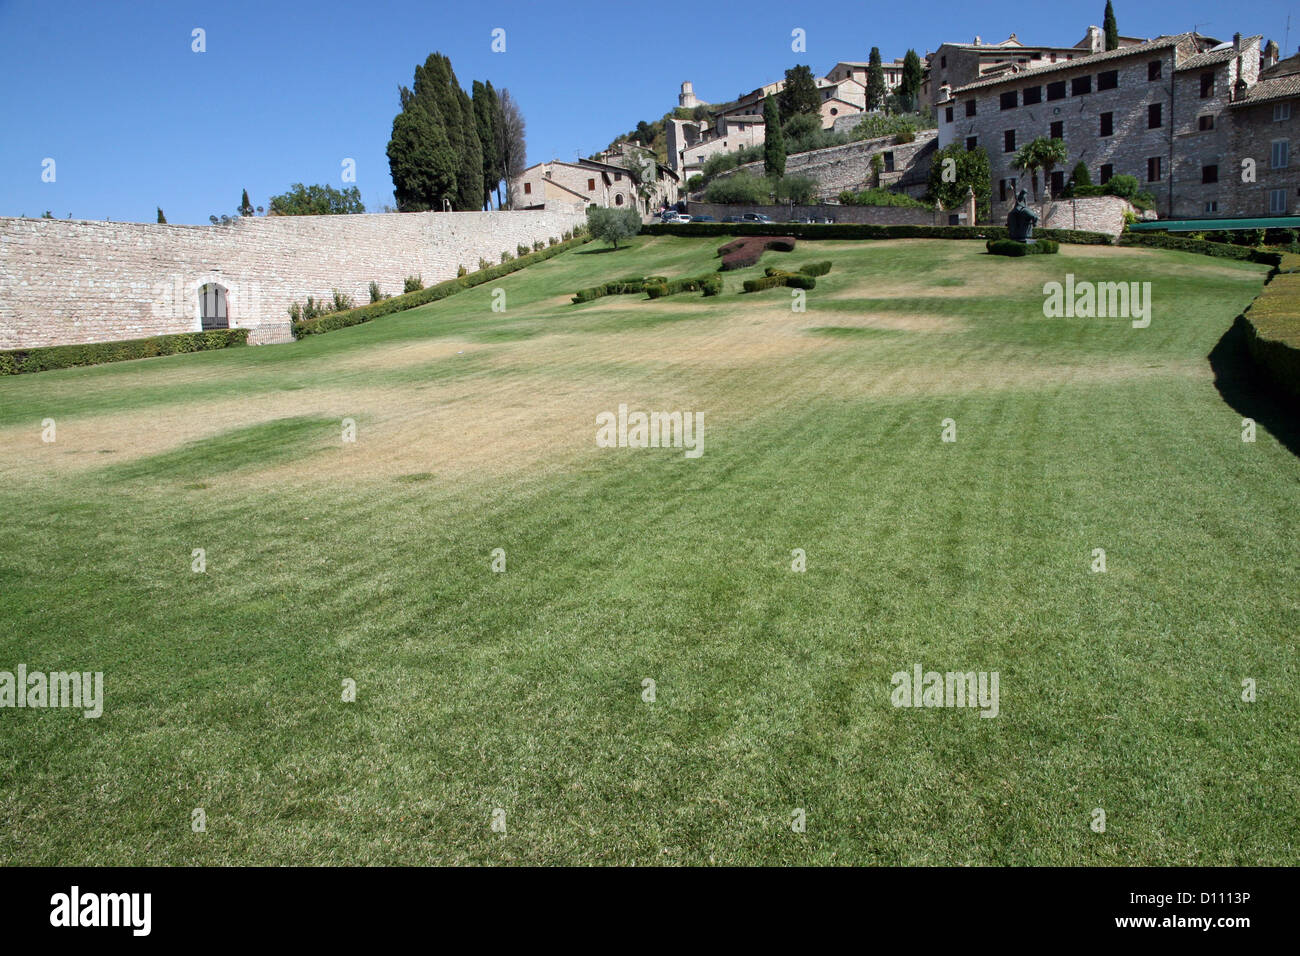 exceptional garden in front of the Basilica of Assisi with Tau and Pax in grass Stock Photo